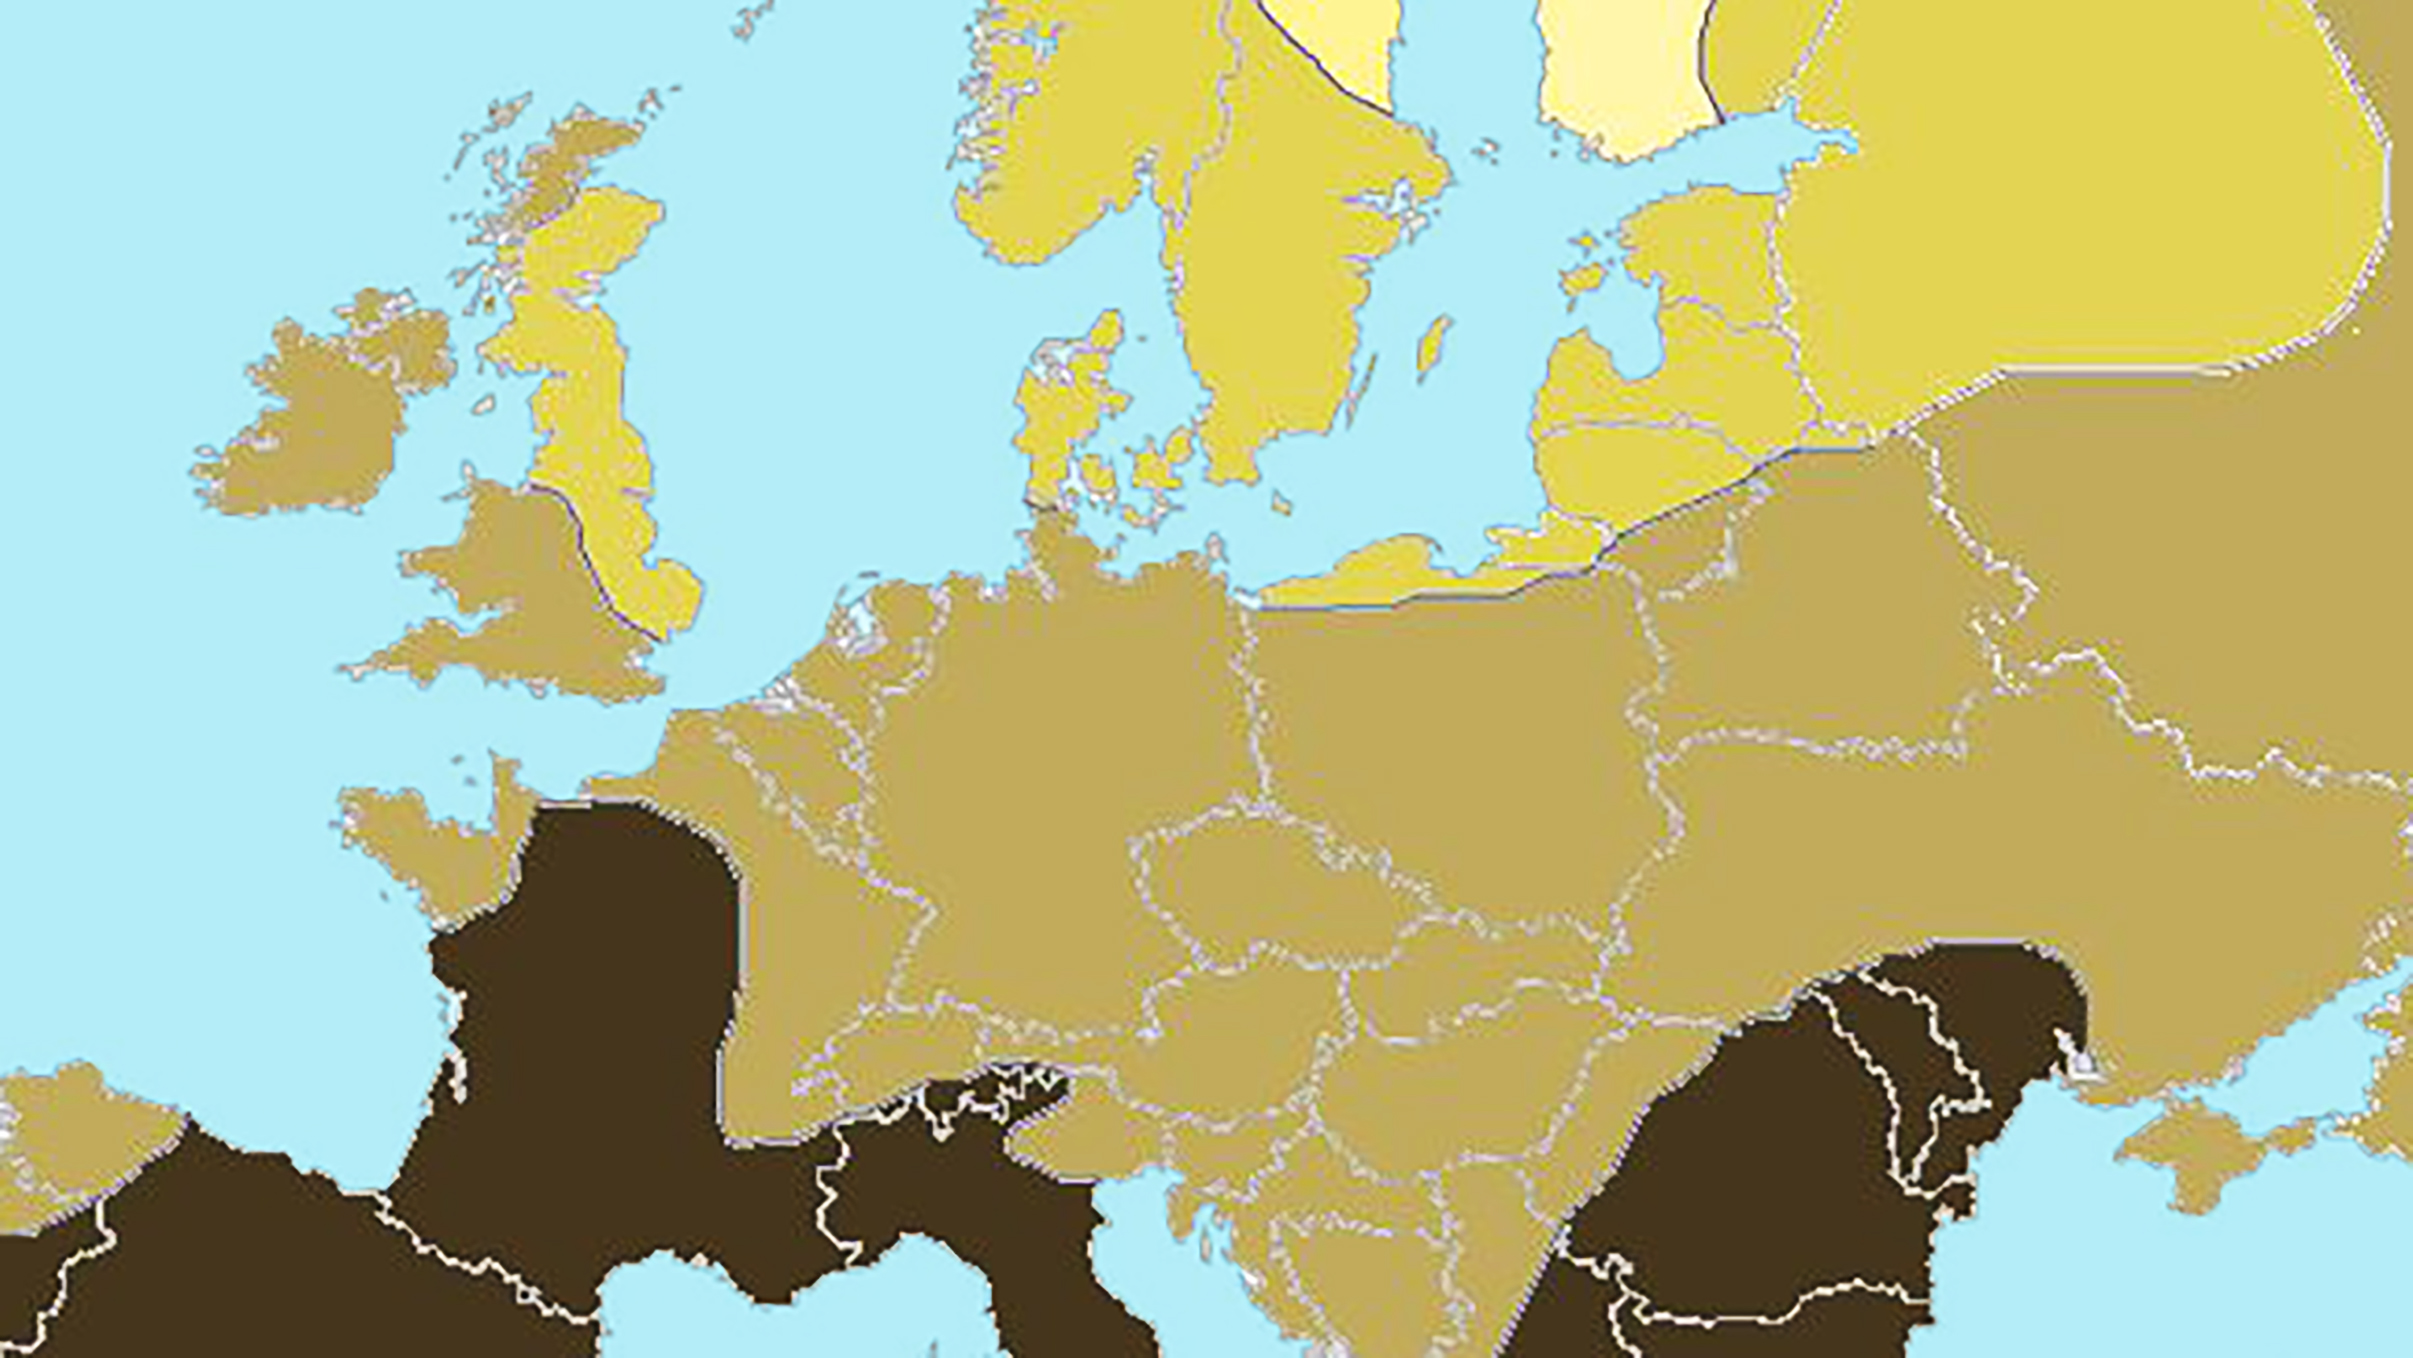 The Blonde Vs Brunette Map Of Europe Big Think